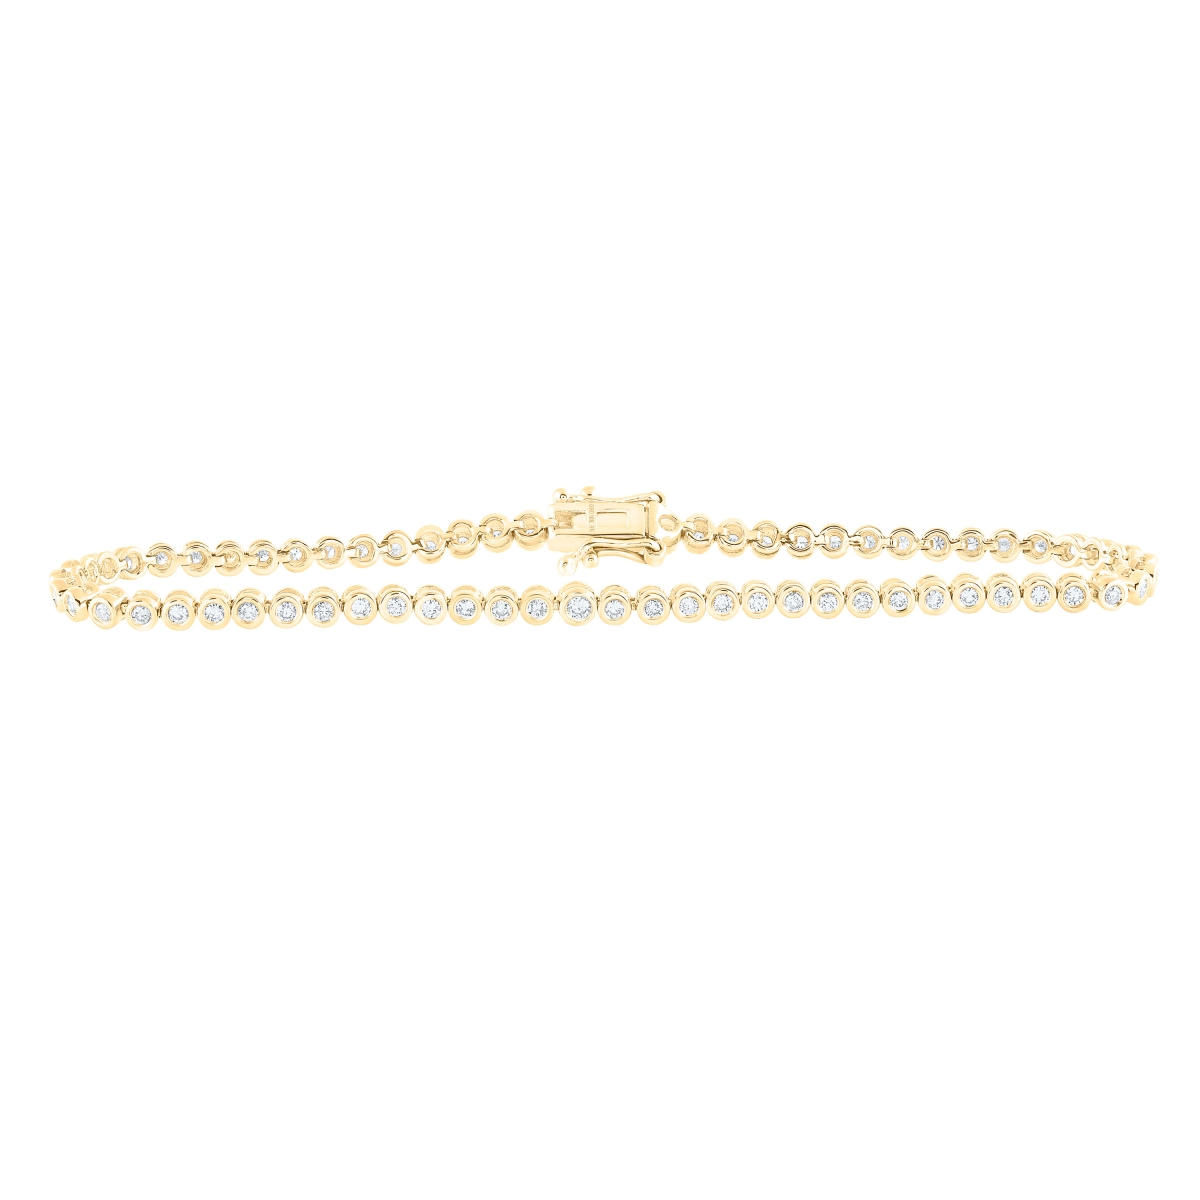 Picture of GND 172478 10K Yellow Gold Round Diamond Tennis Bracelet - 0.875 CTTW